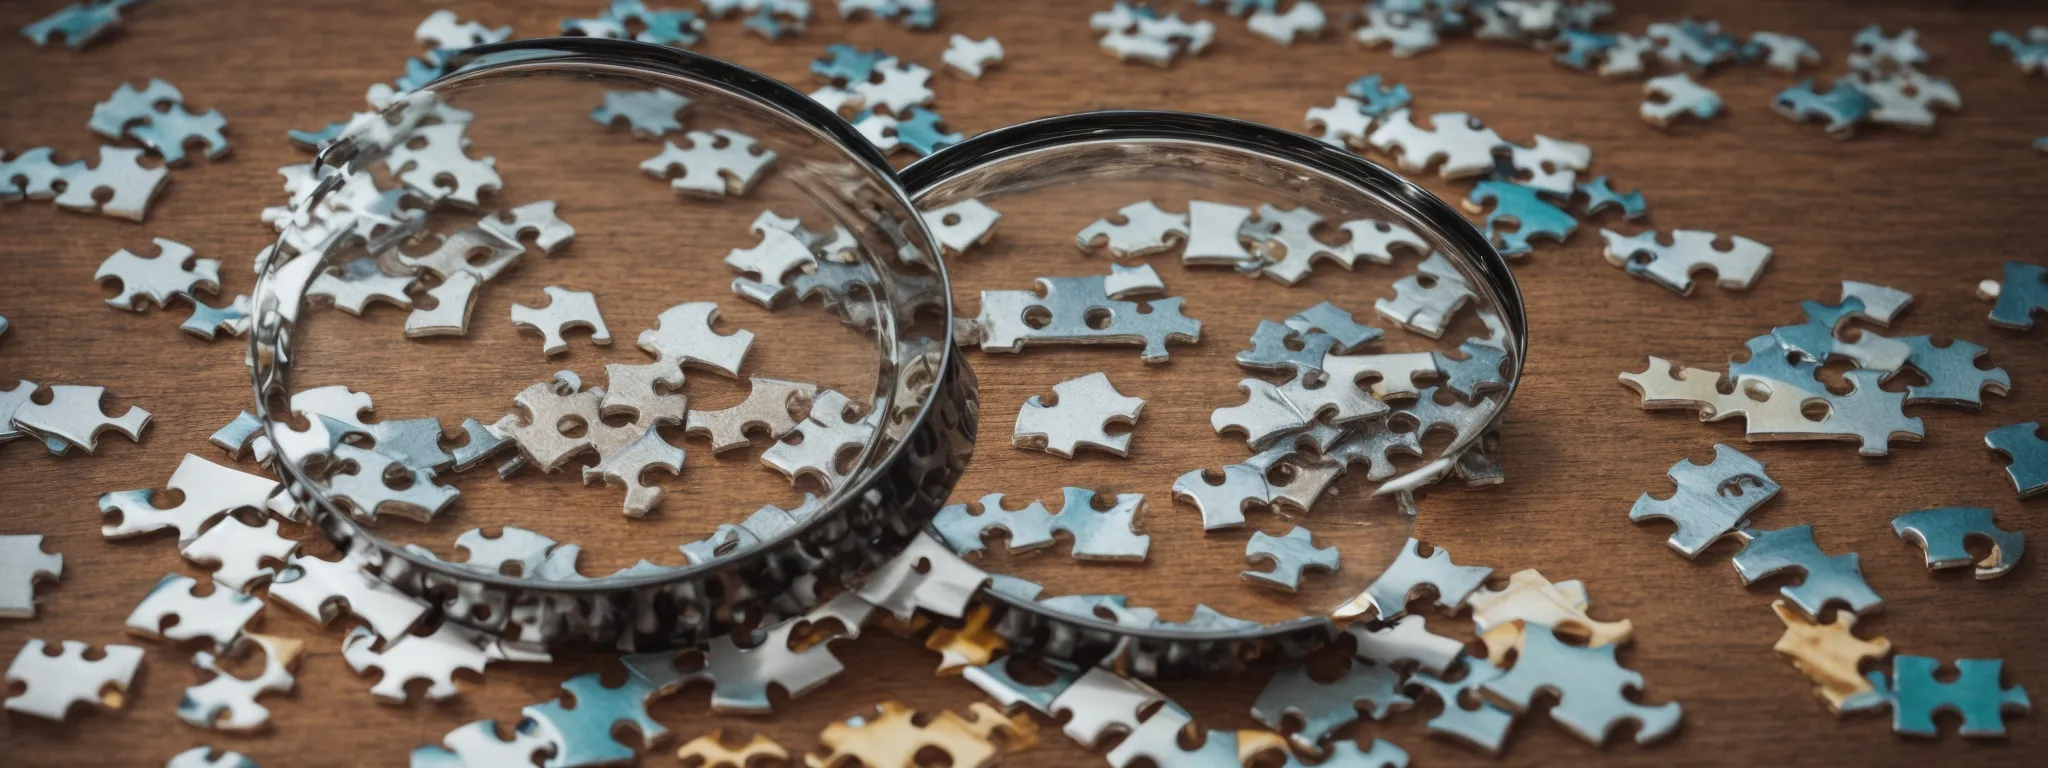 a magnifying glass hovering over a jigsaw puzzle with highlighted pieces represents keyword analysis in the context of seo and serp dynamics.